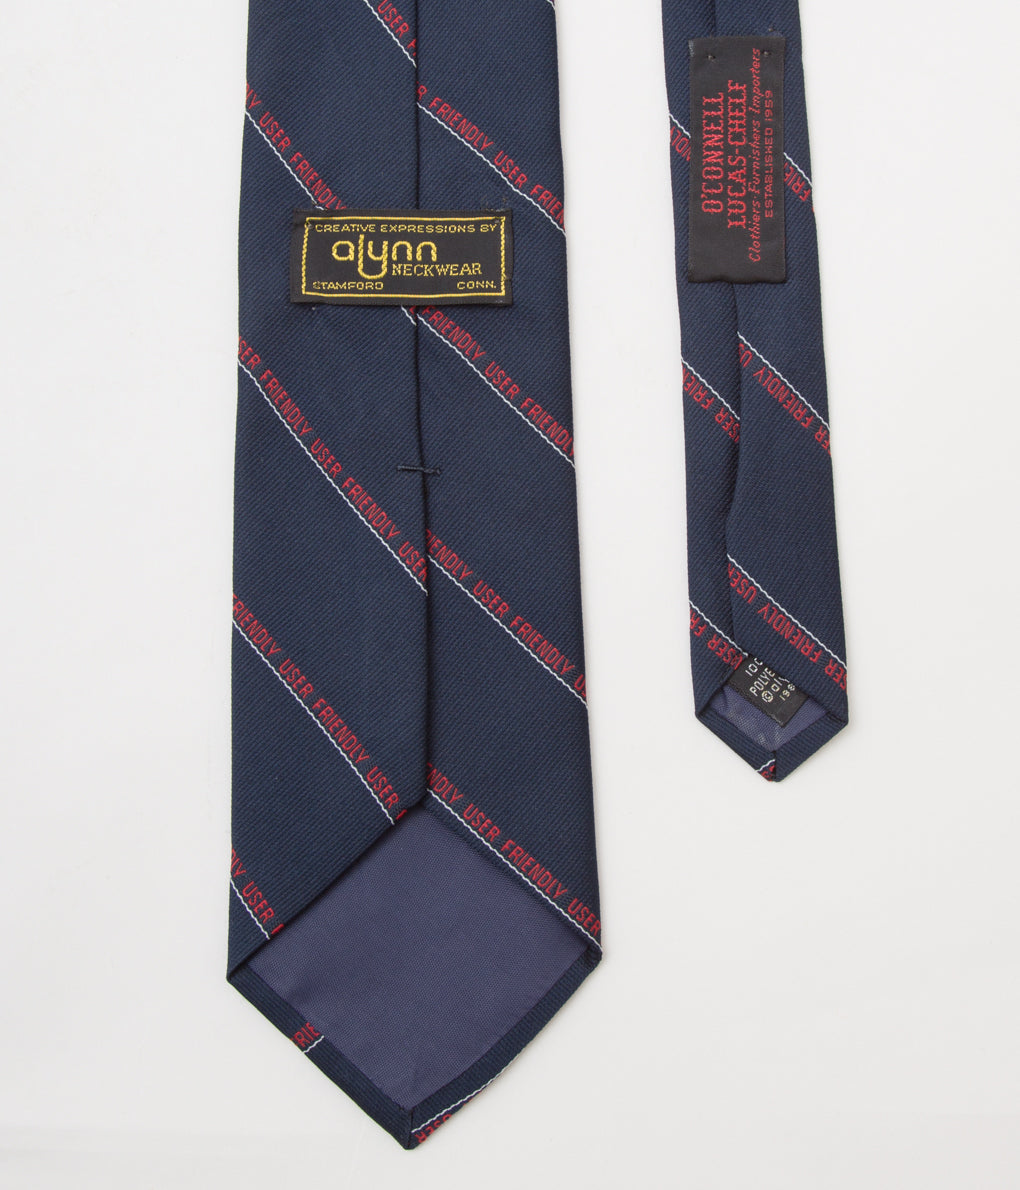 FROM USA "O'CONELL LUCAS-CHELF EMBROIDERED TIE USER FRIENDLY"(NAVY)